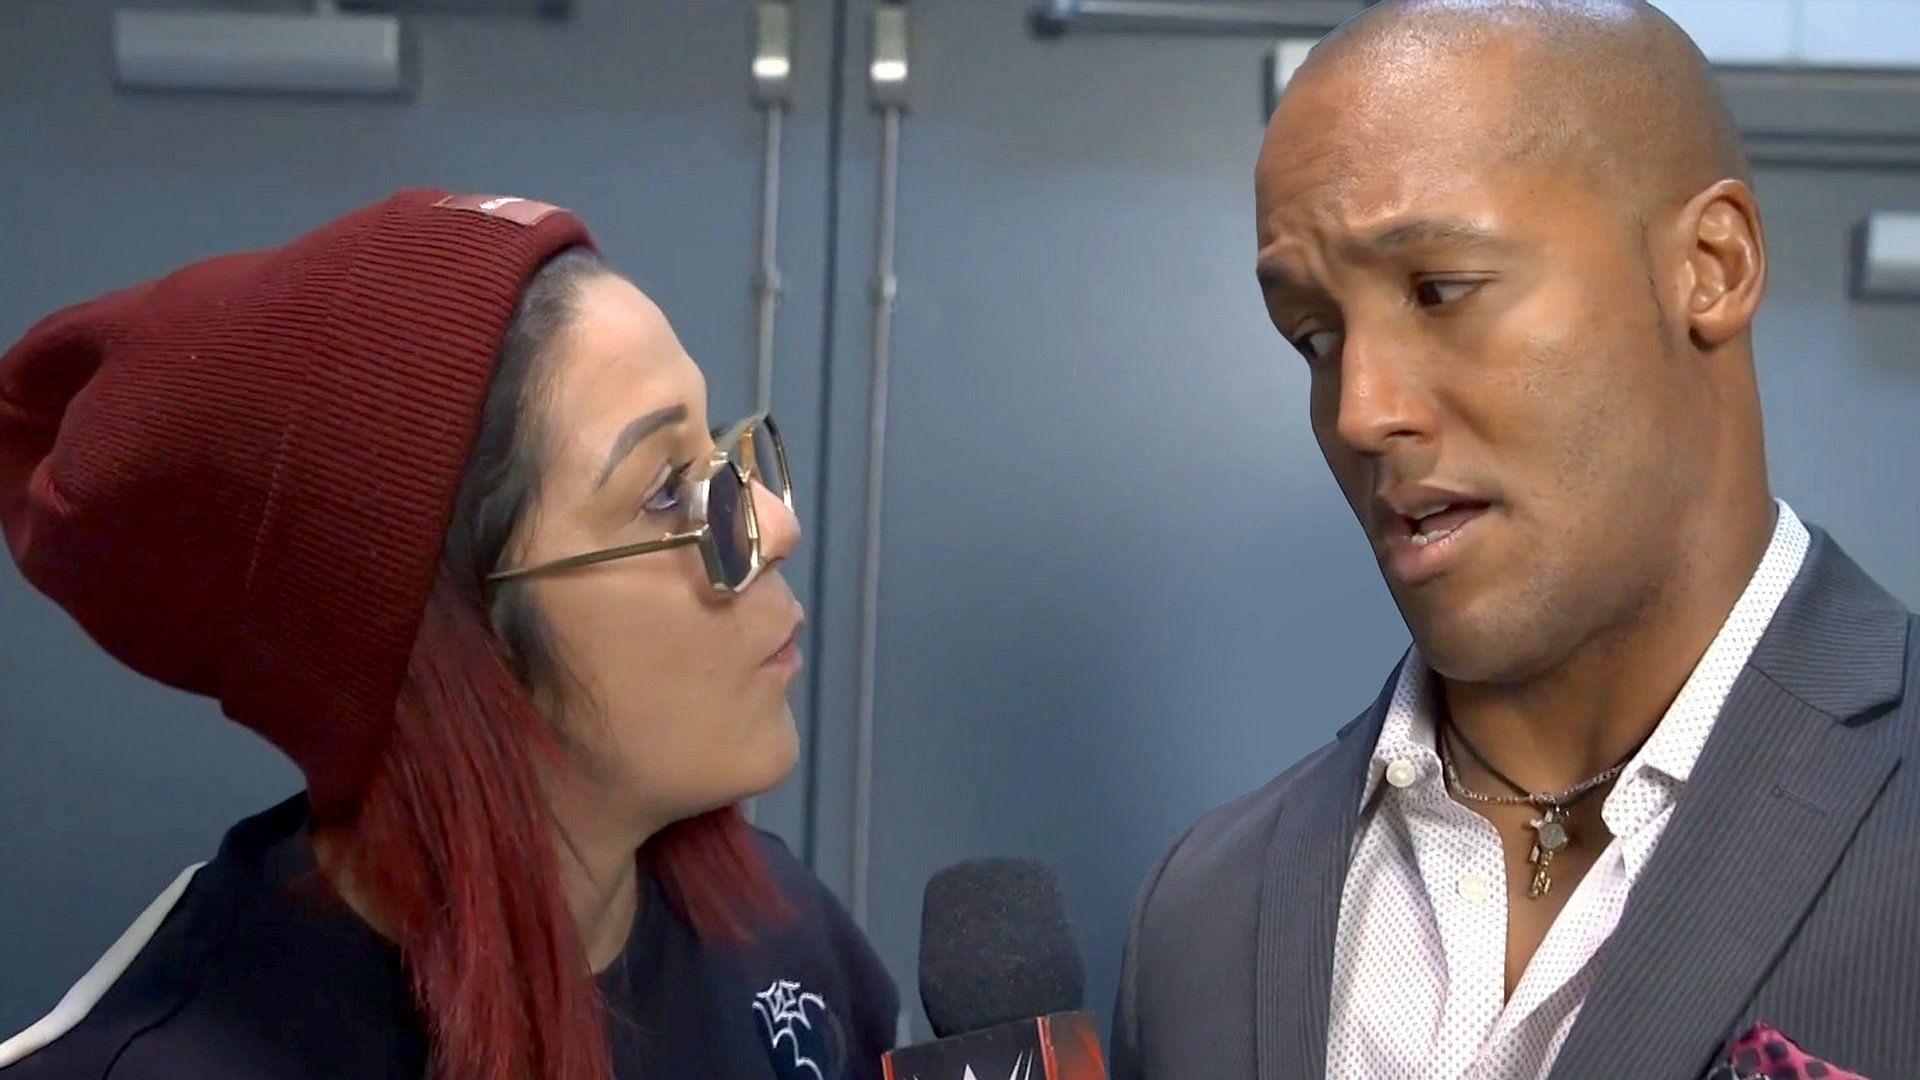 Bayley (left) and Byron Saxton (right)